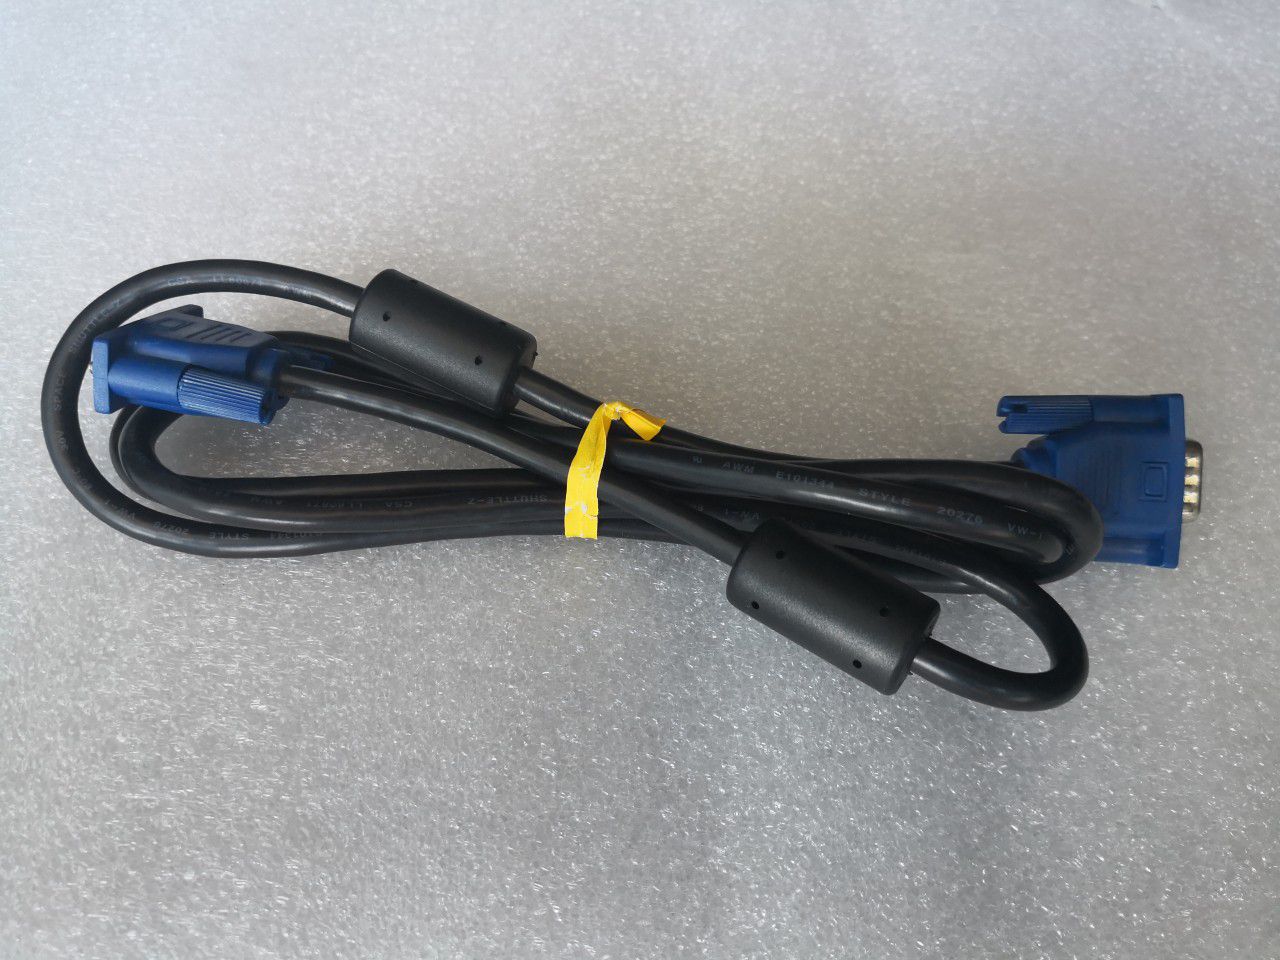 VGA Video Cable for TV Computer Monitor Male to Male (Blue Connector)